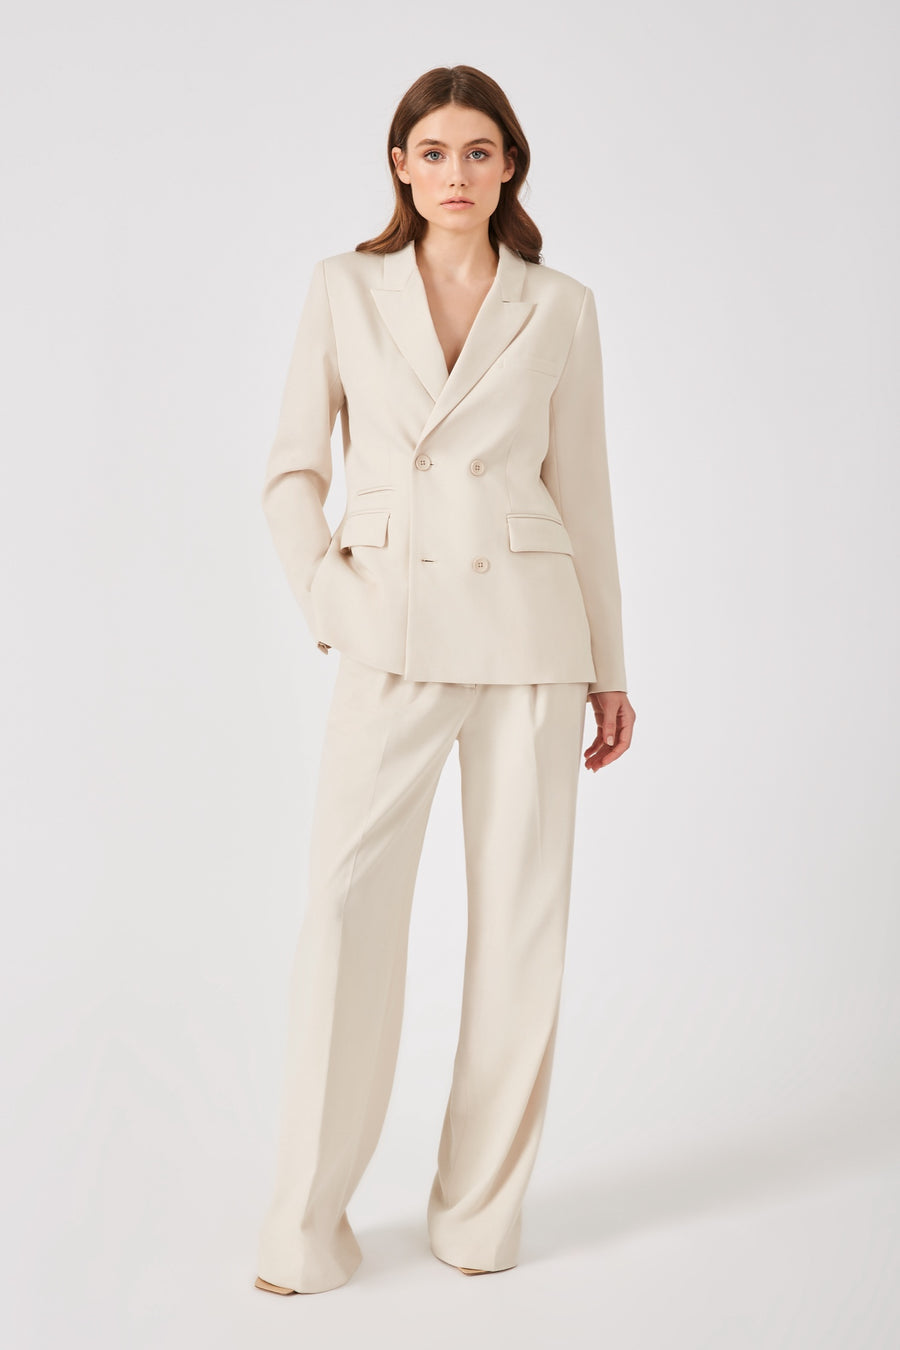 THE MULBERRY DOUBLE BREASTED BLAZER - NATURAL